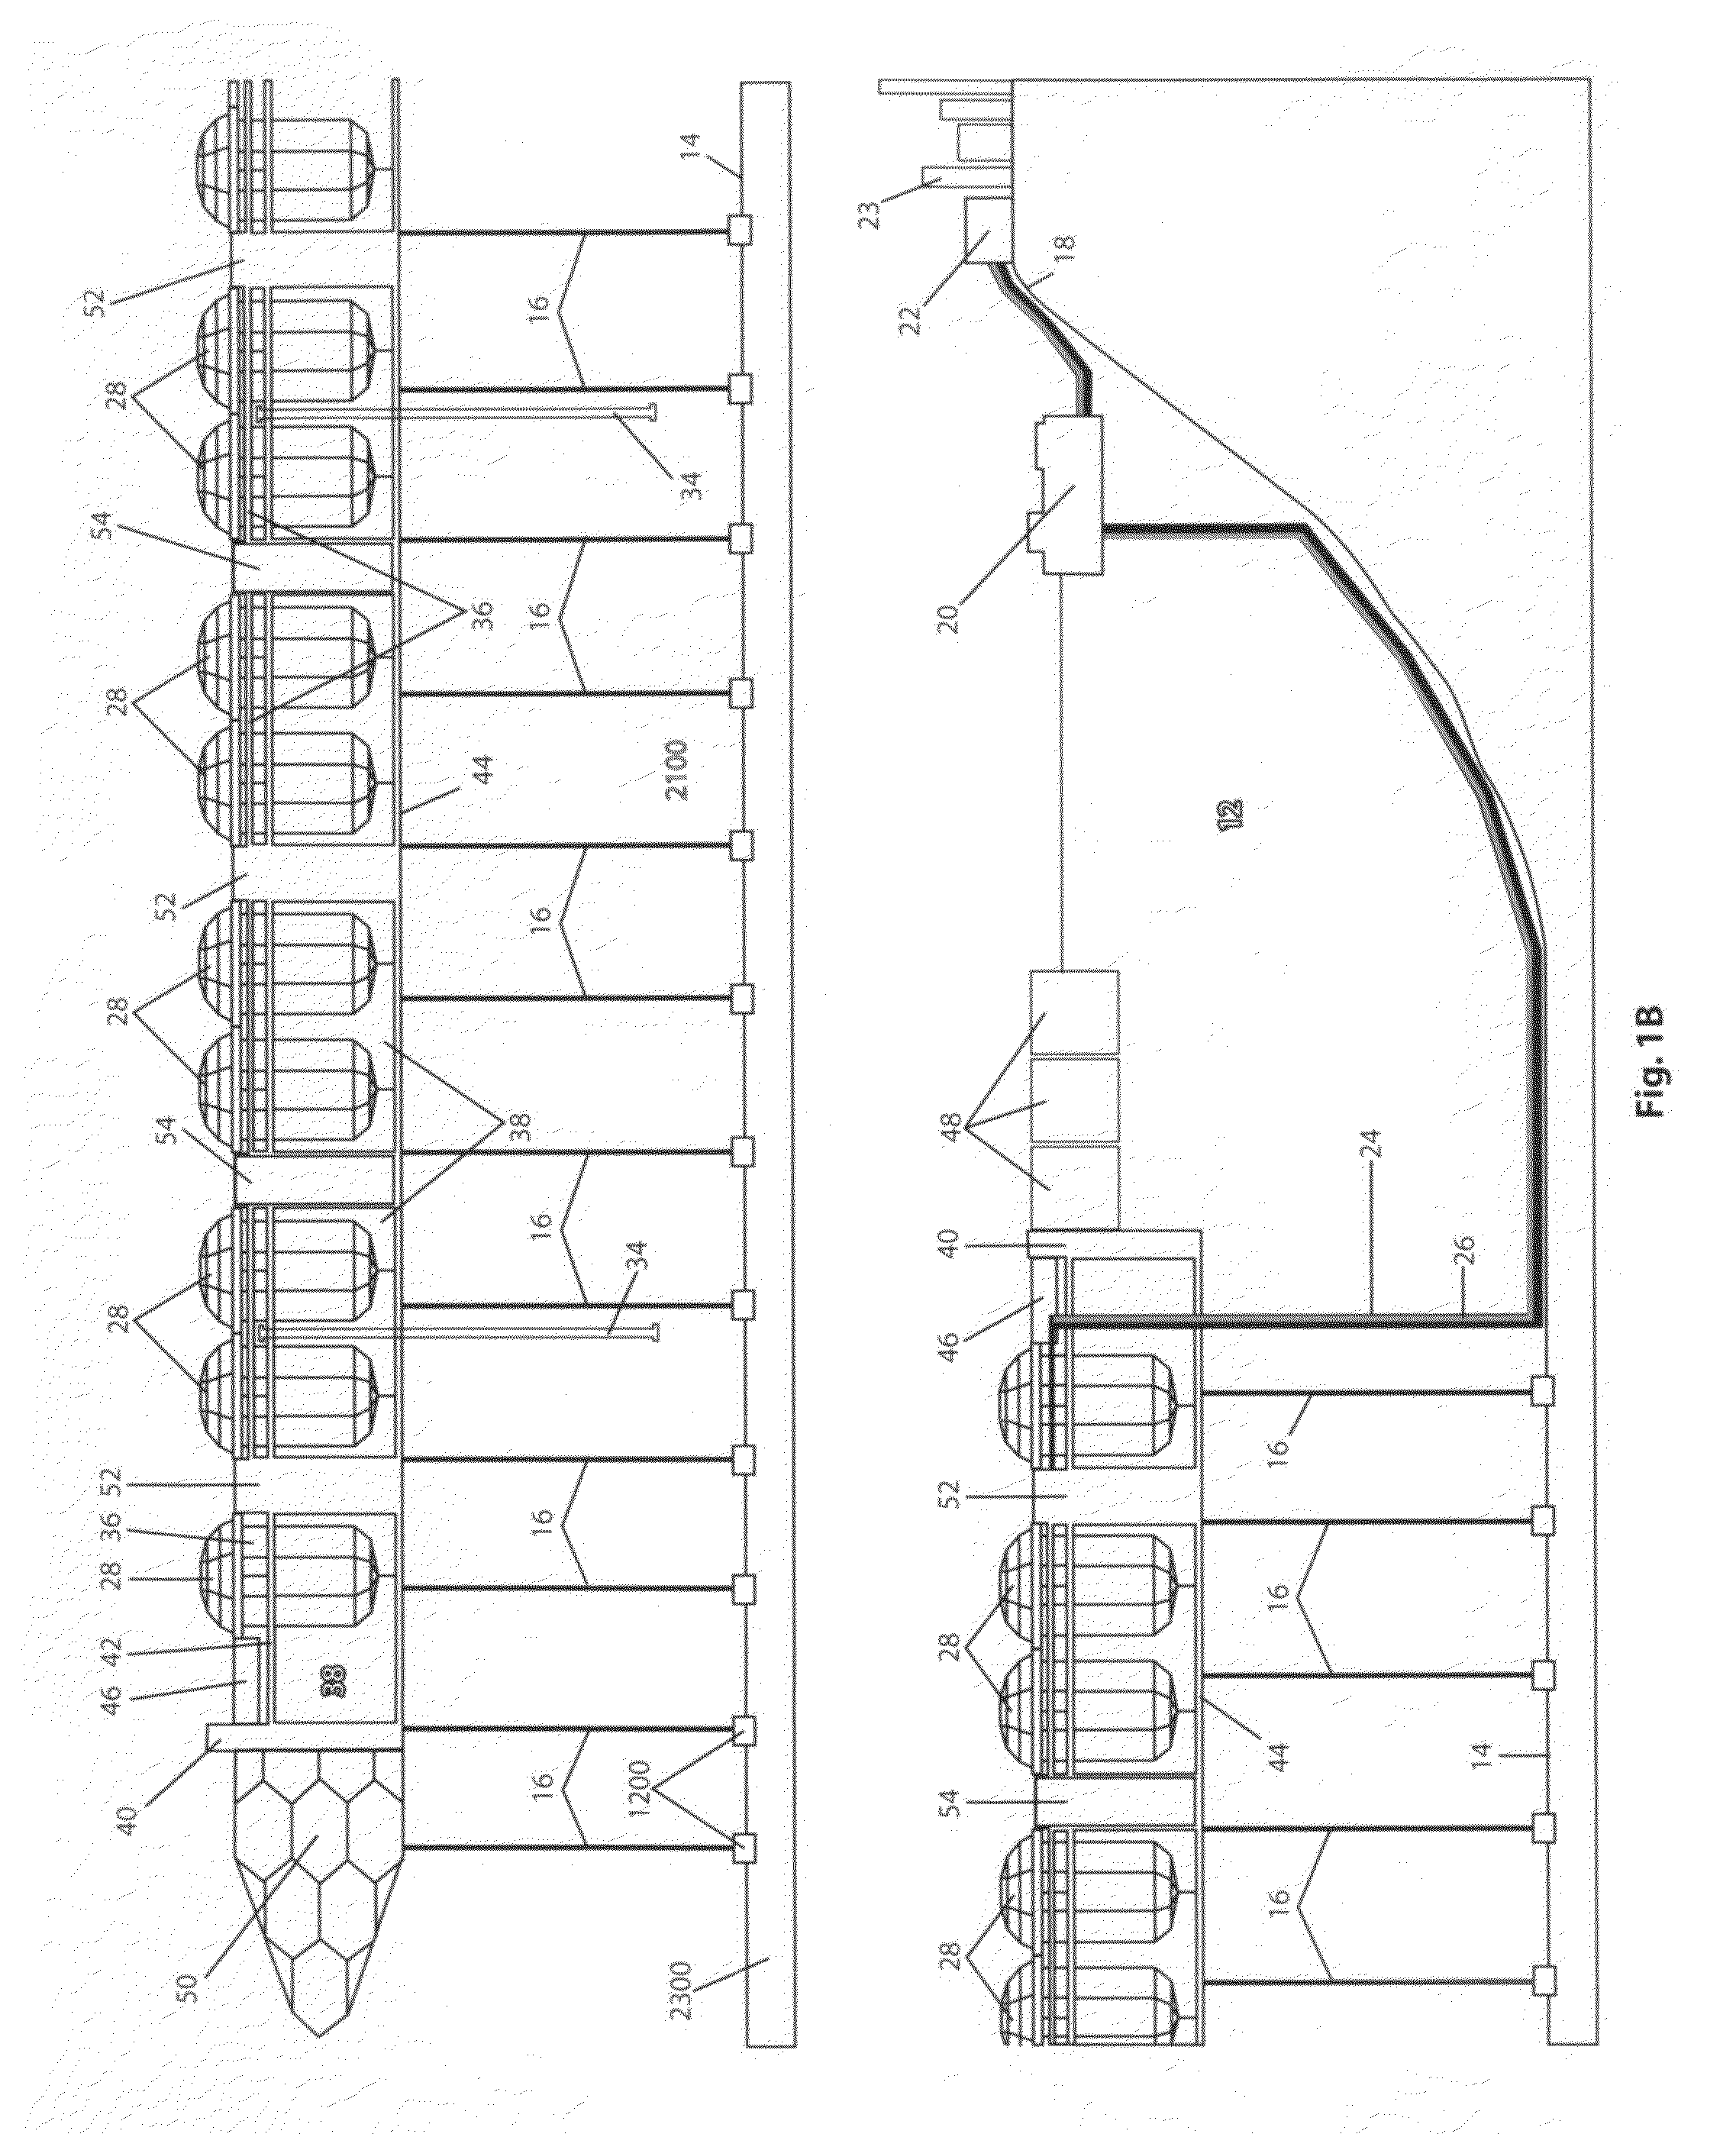 Floating solar energy conversion and storage apparatus